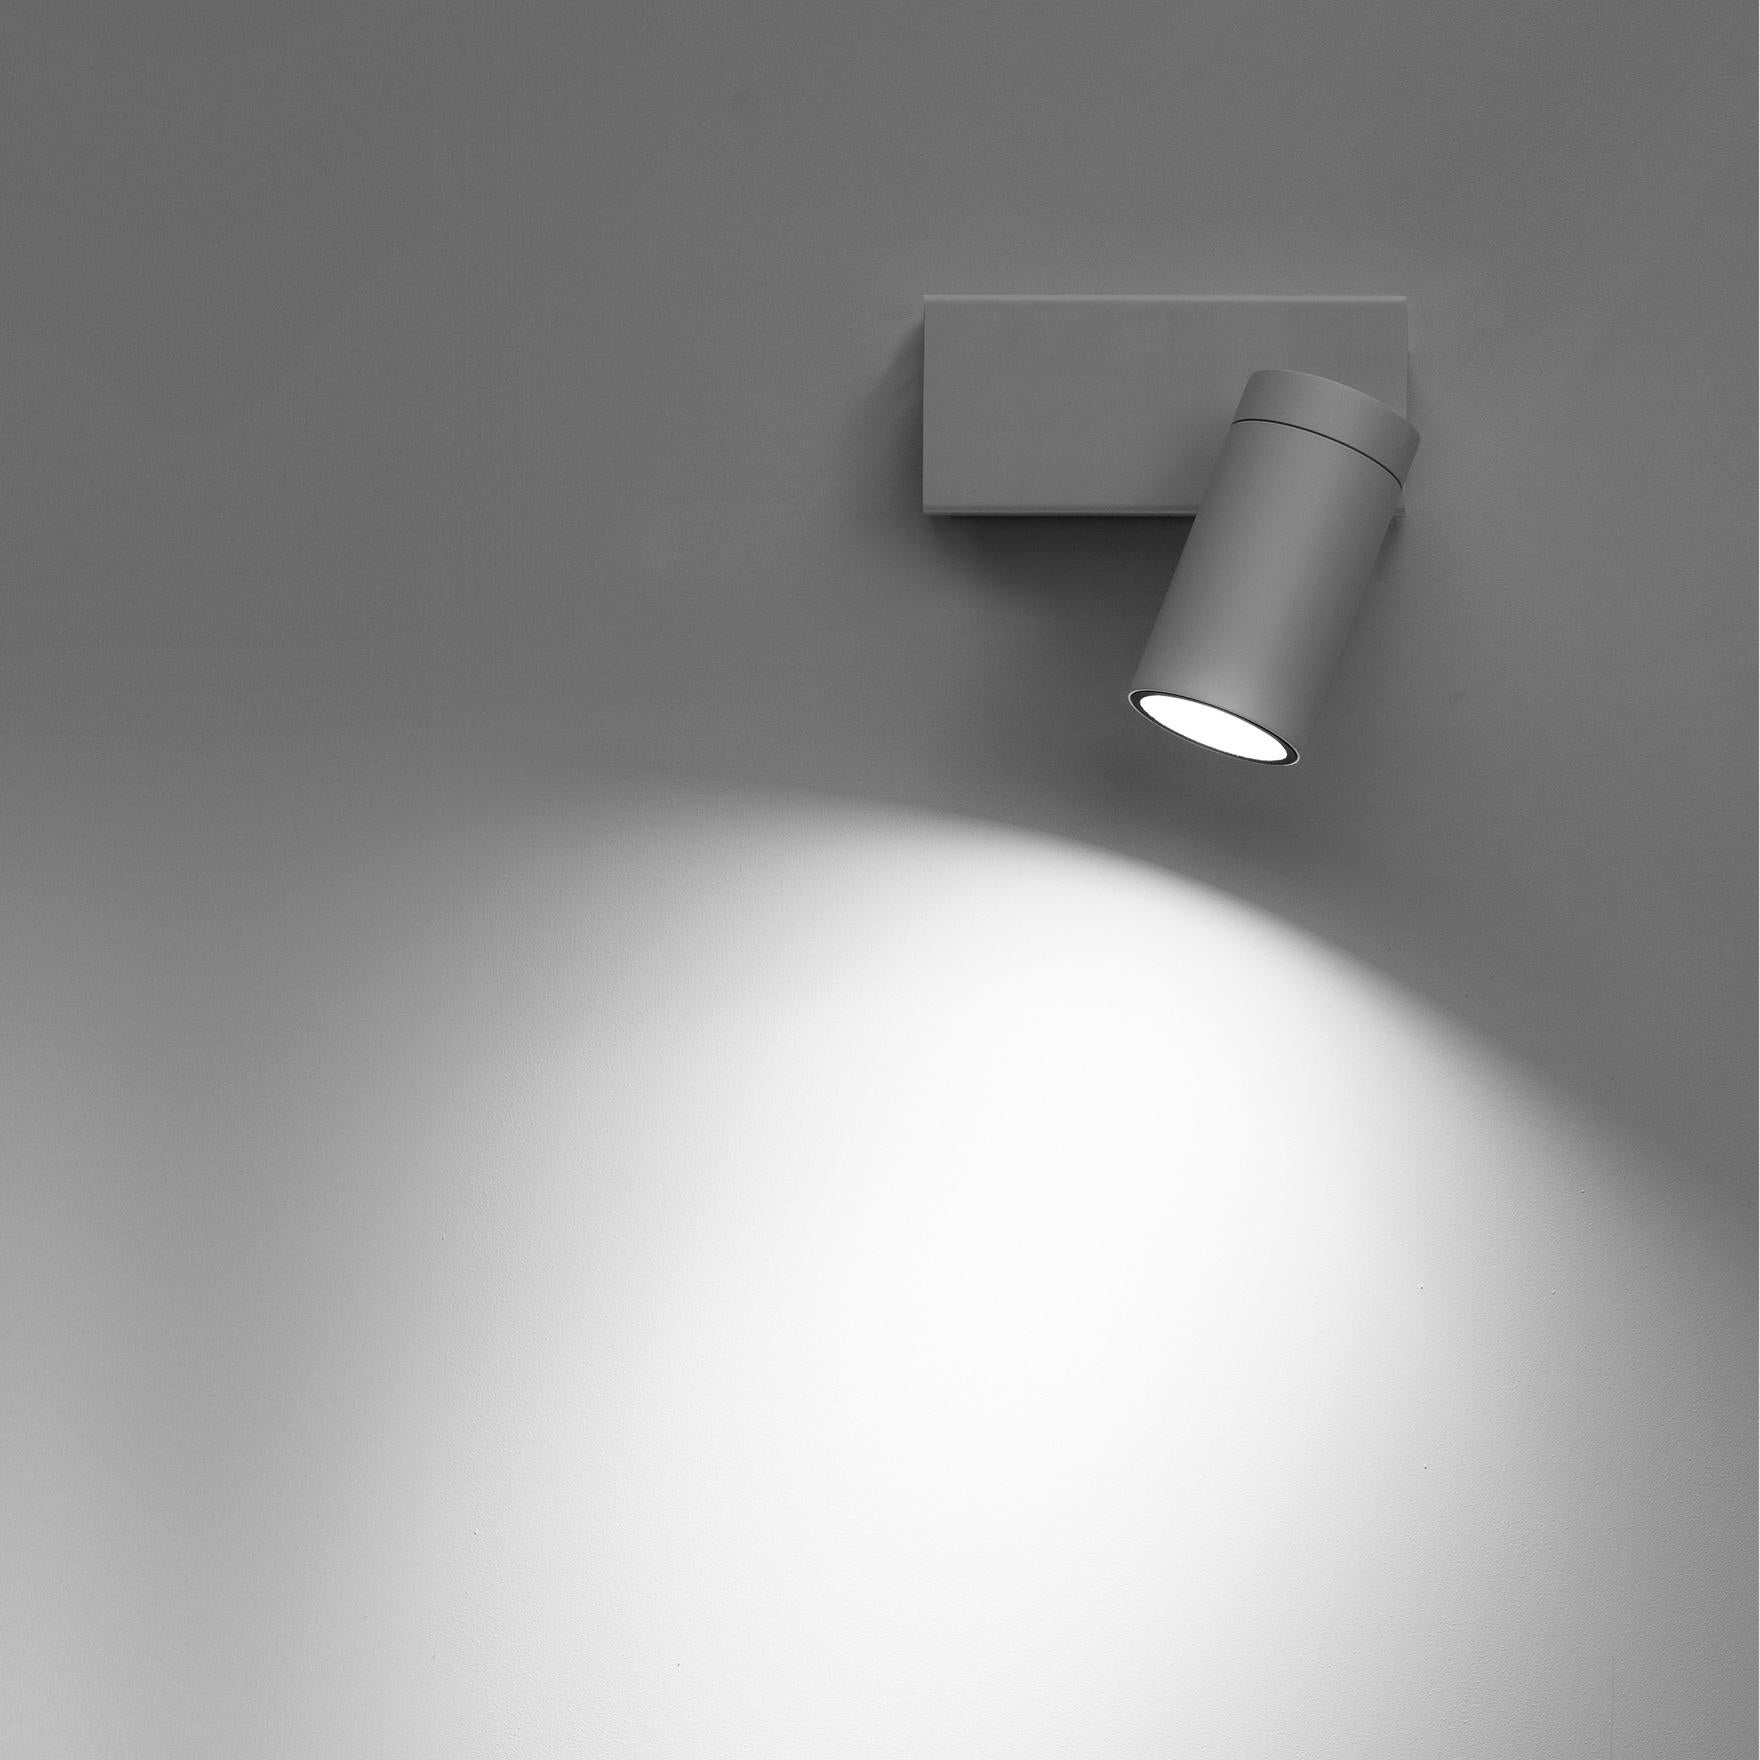 A tool to light.
A luminaire designed for use with state-of-the-art LED modules to offer superior performance and a wide range of light beams.

Finish: Matt white
Max 10W - GU10
120V - 60Hz
Bulb not included

DIMENSIONS:
Ø 2.36'' x 4.52''

Available